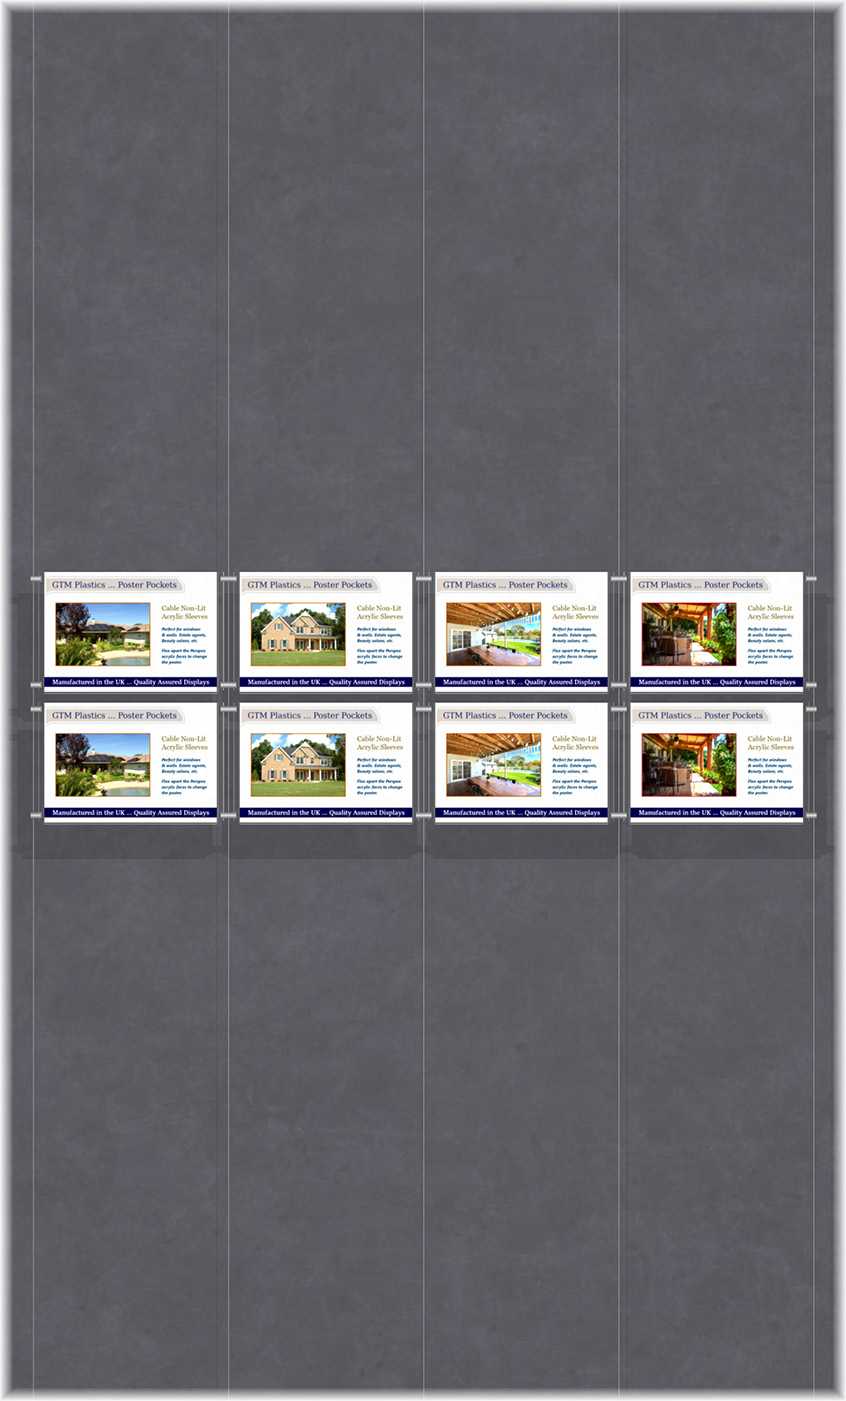 Poster Display - 4x2 Landscape single width pockets - wire suspended poster kit